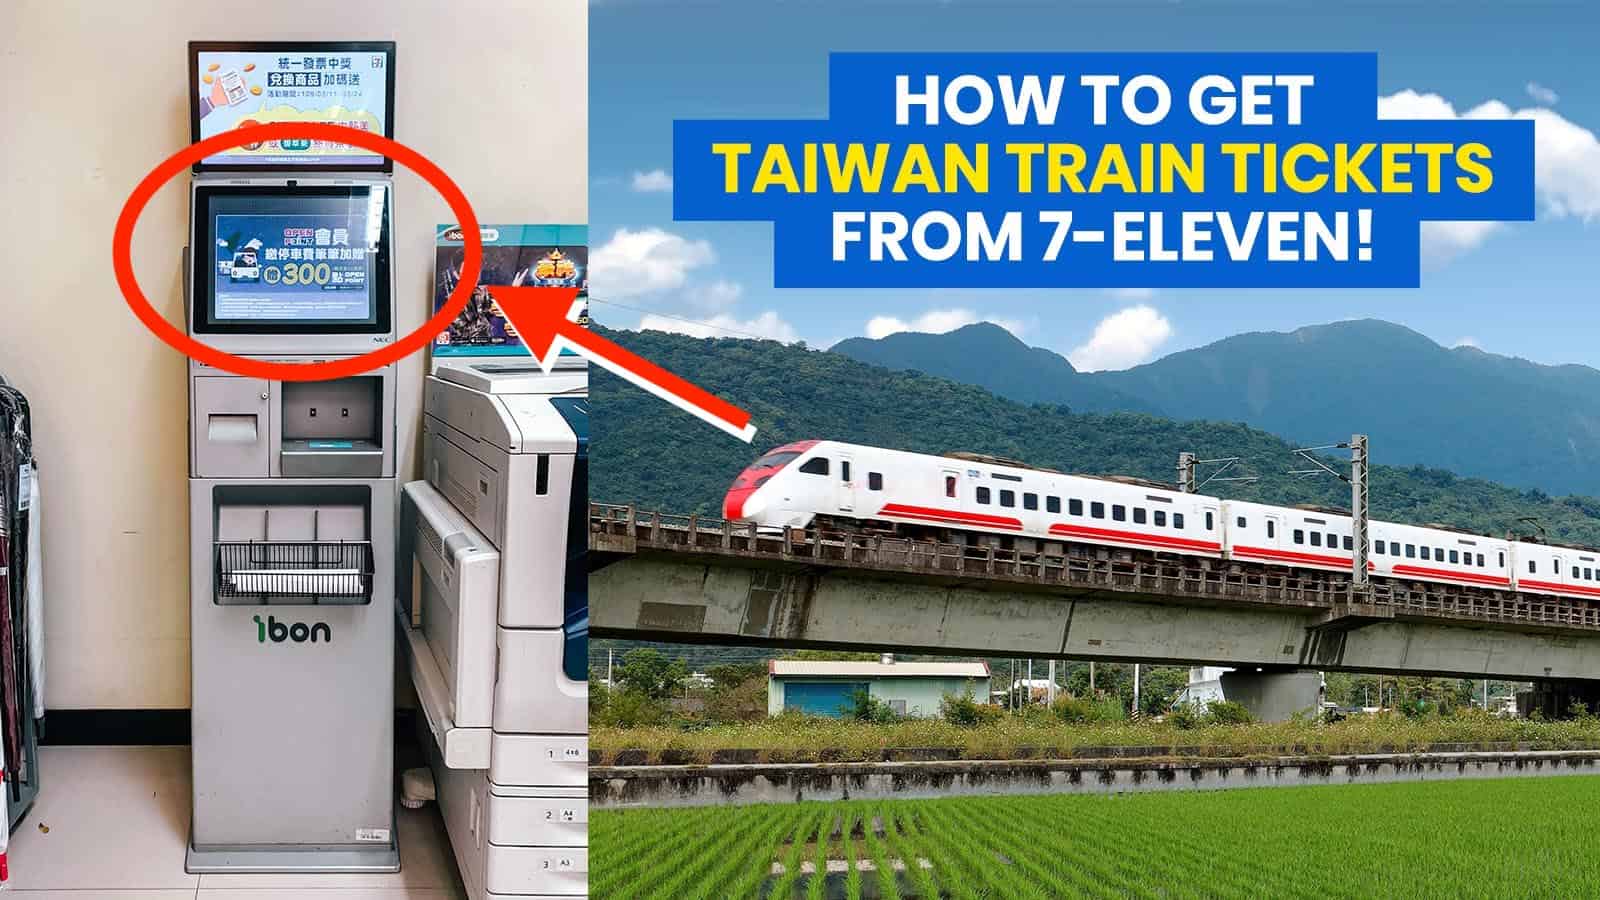 How to Get TAIWAN TRAIN TICKETS from 7-Eleven (ibon Kiosk)